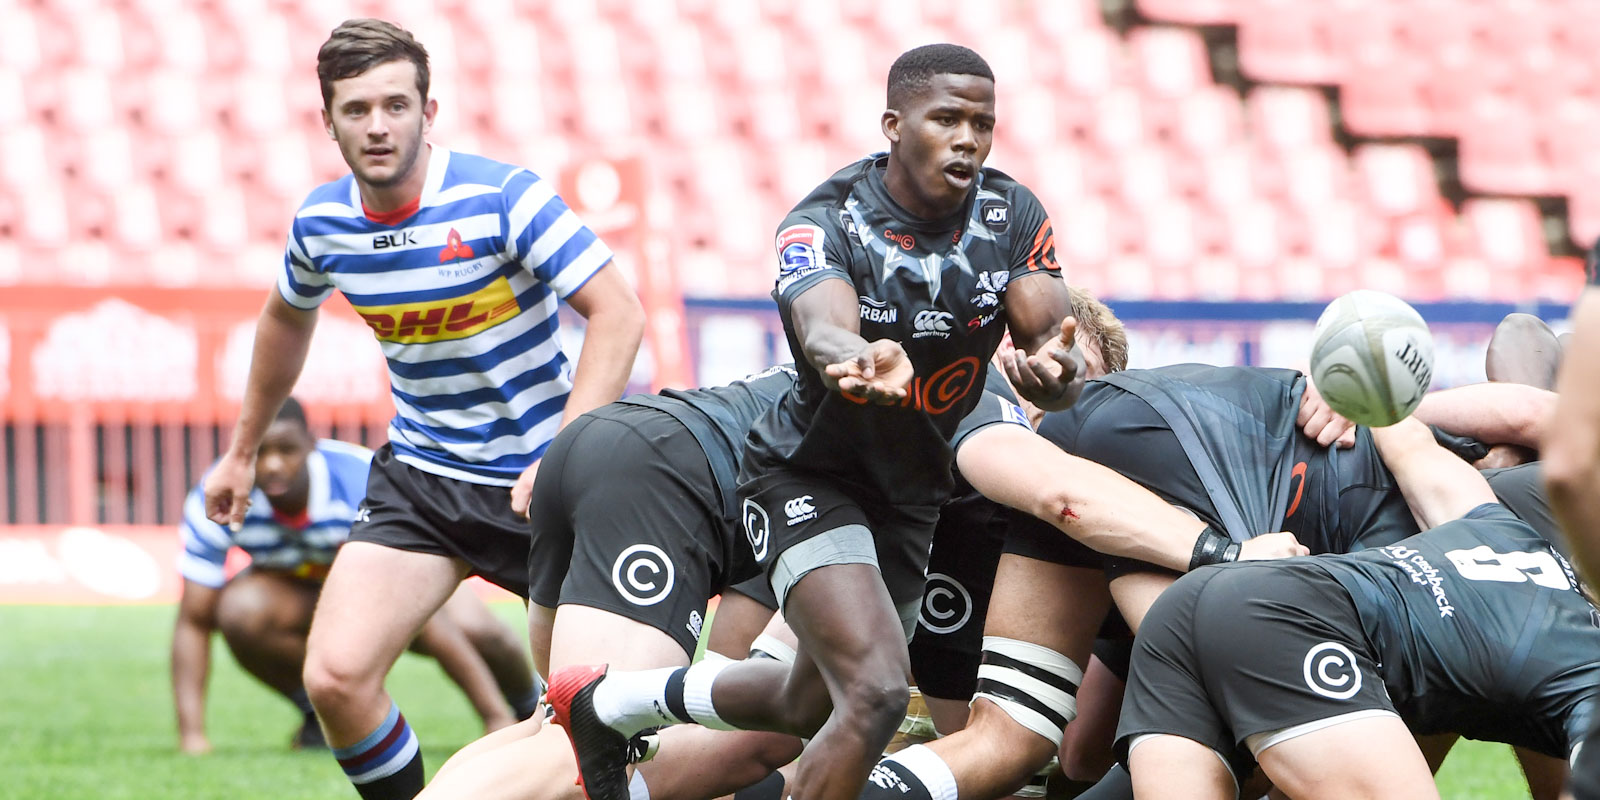 The Cell C Sharks' Lucky Dlepu gets the ball away